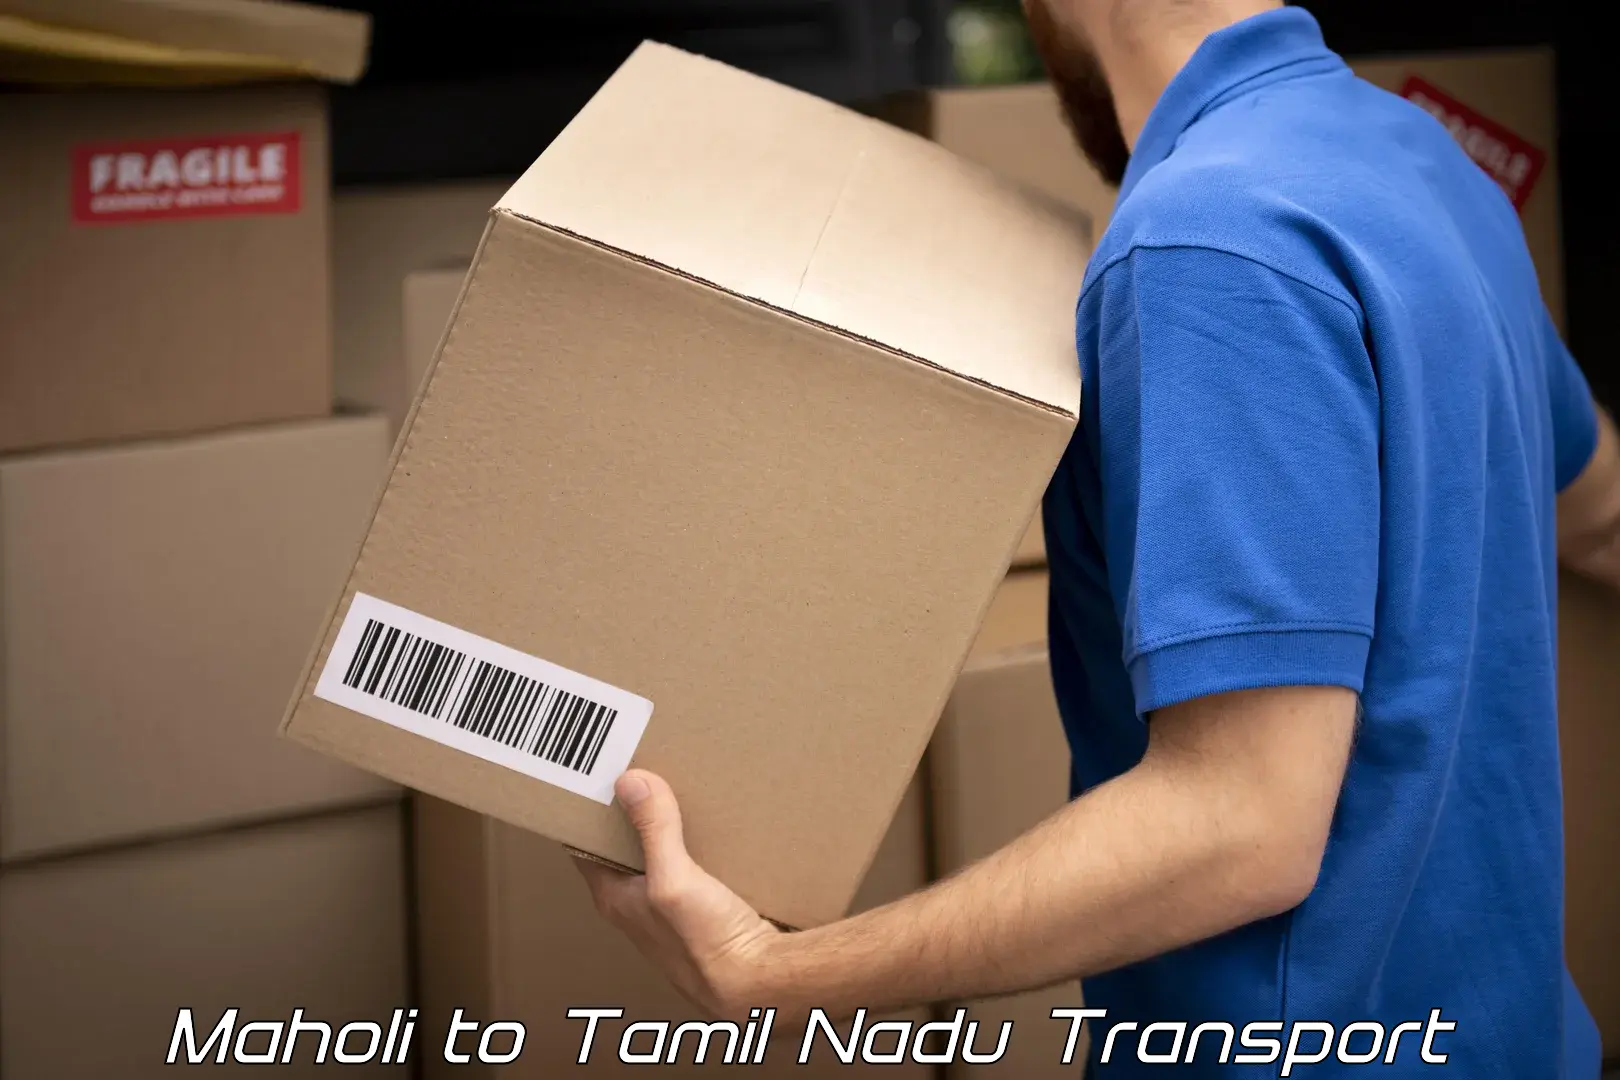 Express transport services Maholi to Omalur